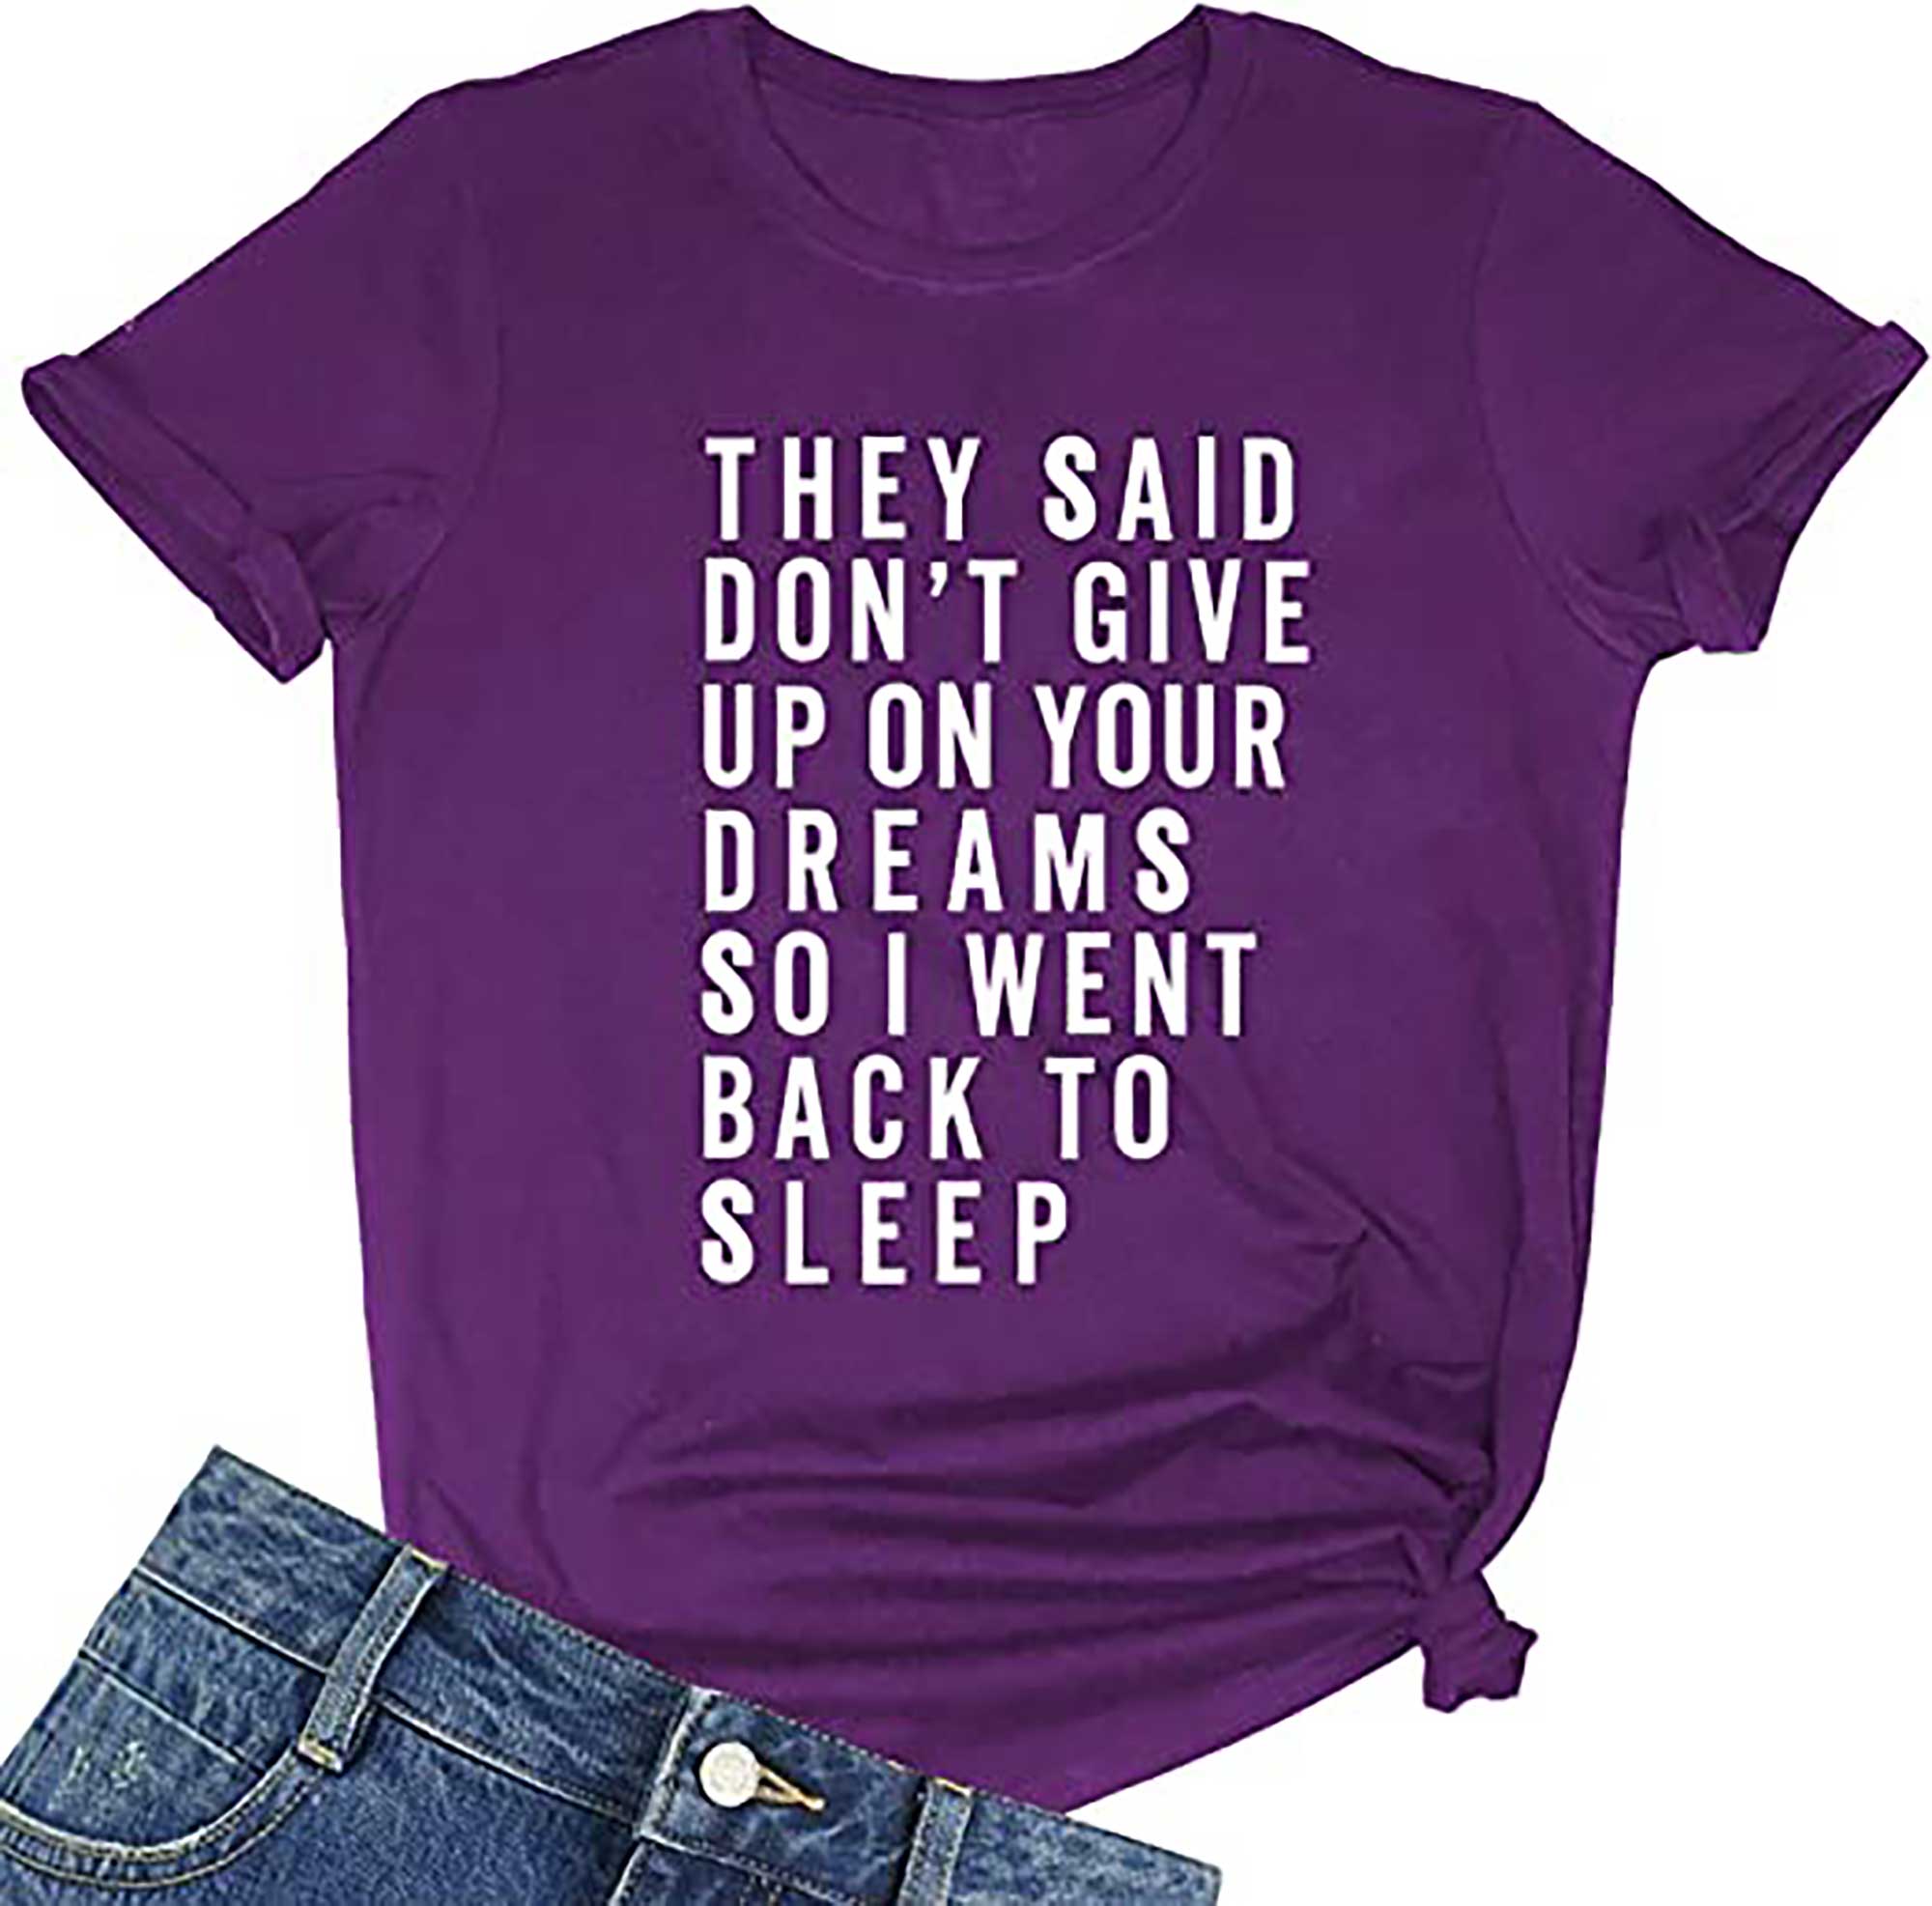 Skitongift They Said Dont Give Up On Your Dreams So I Went Back To Sleep Grahpic Letter tee Shirt Fashion